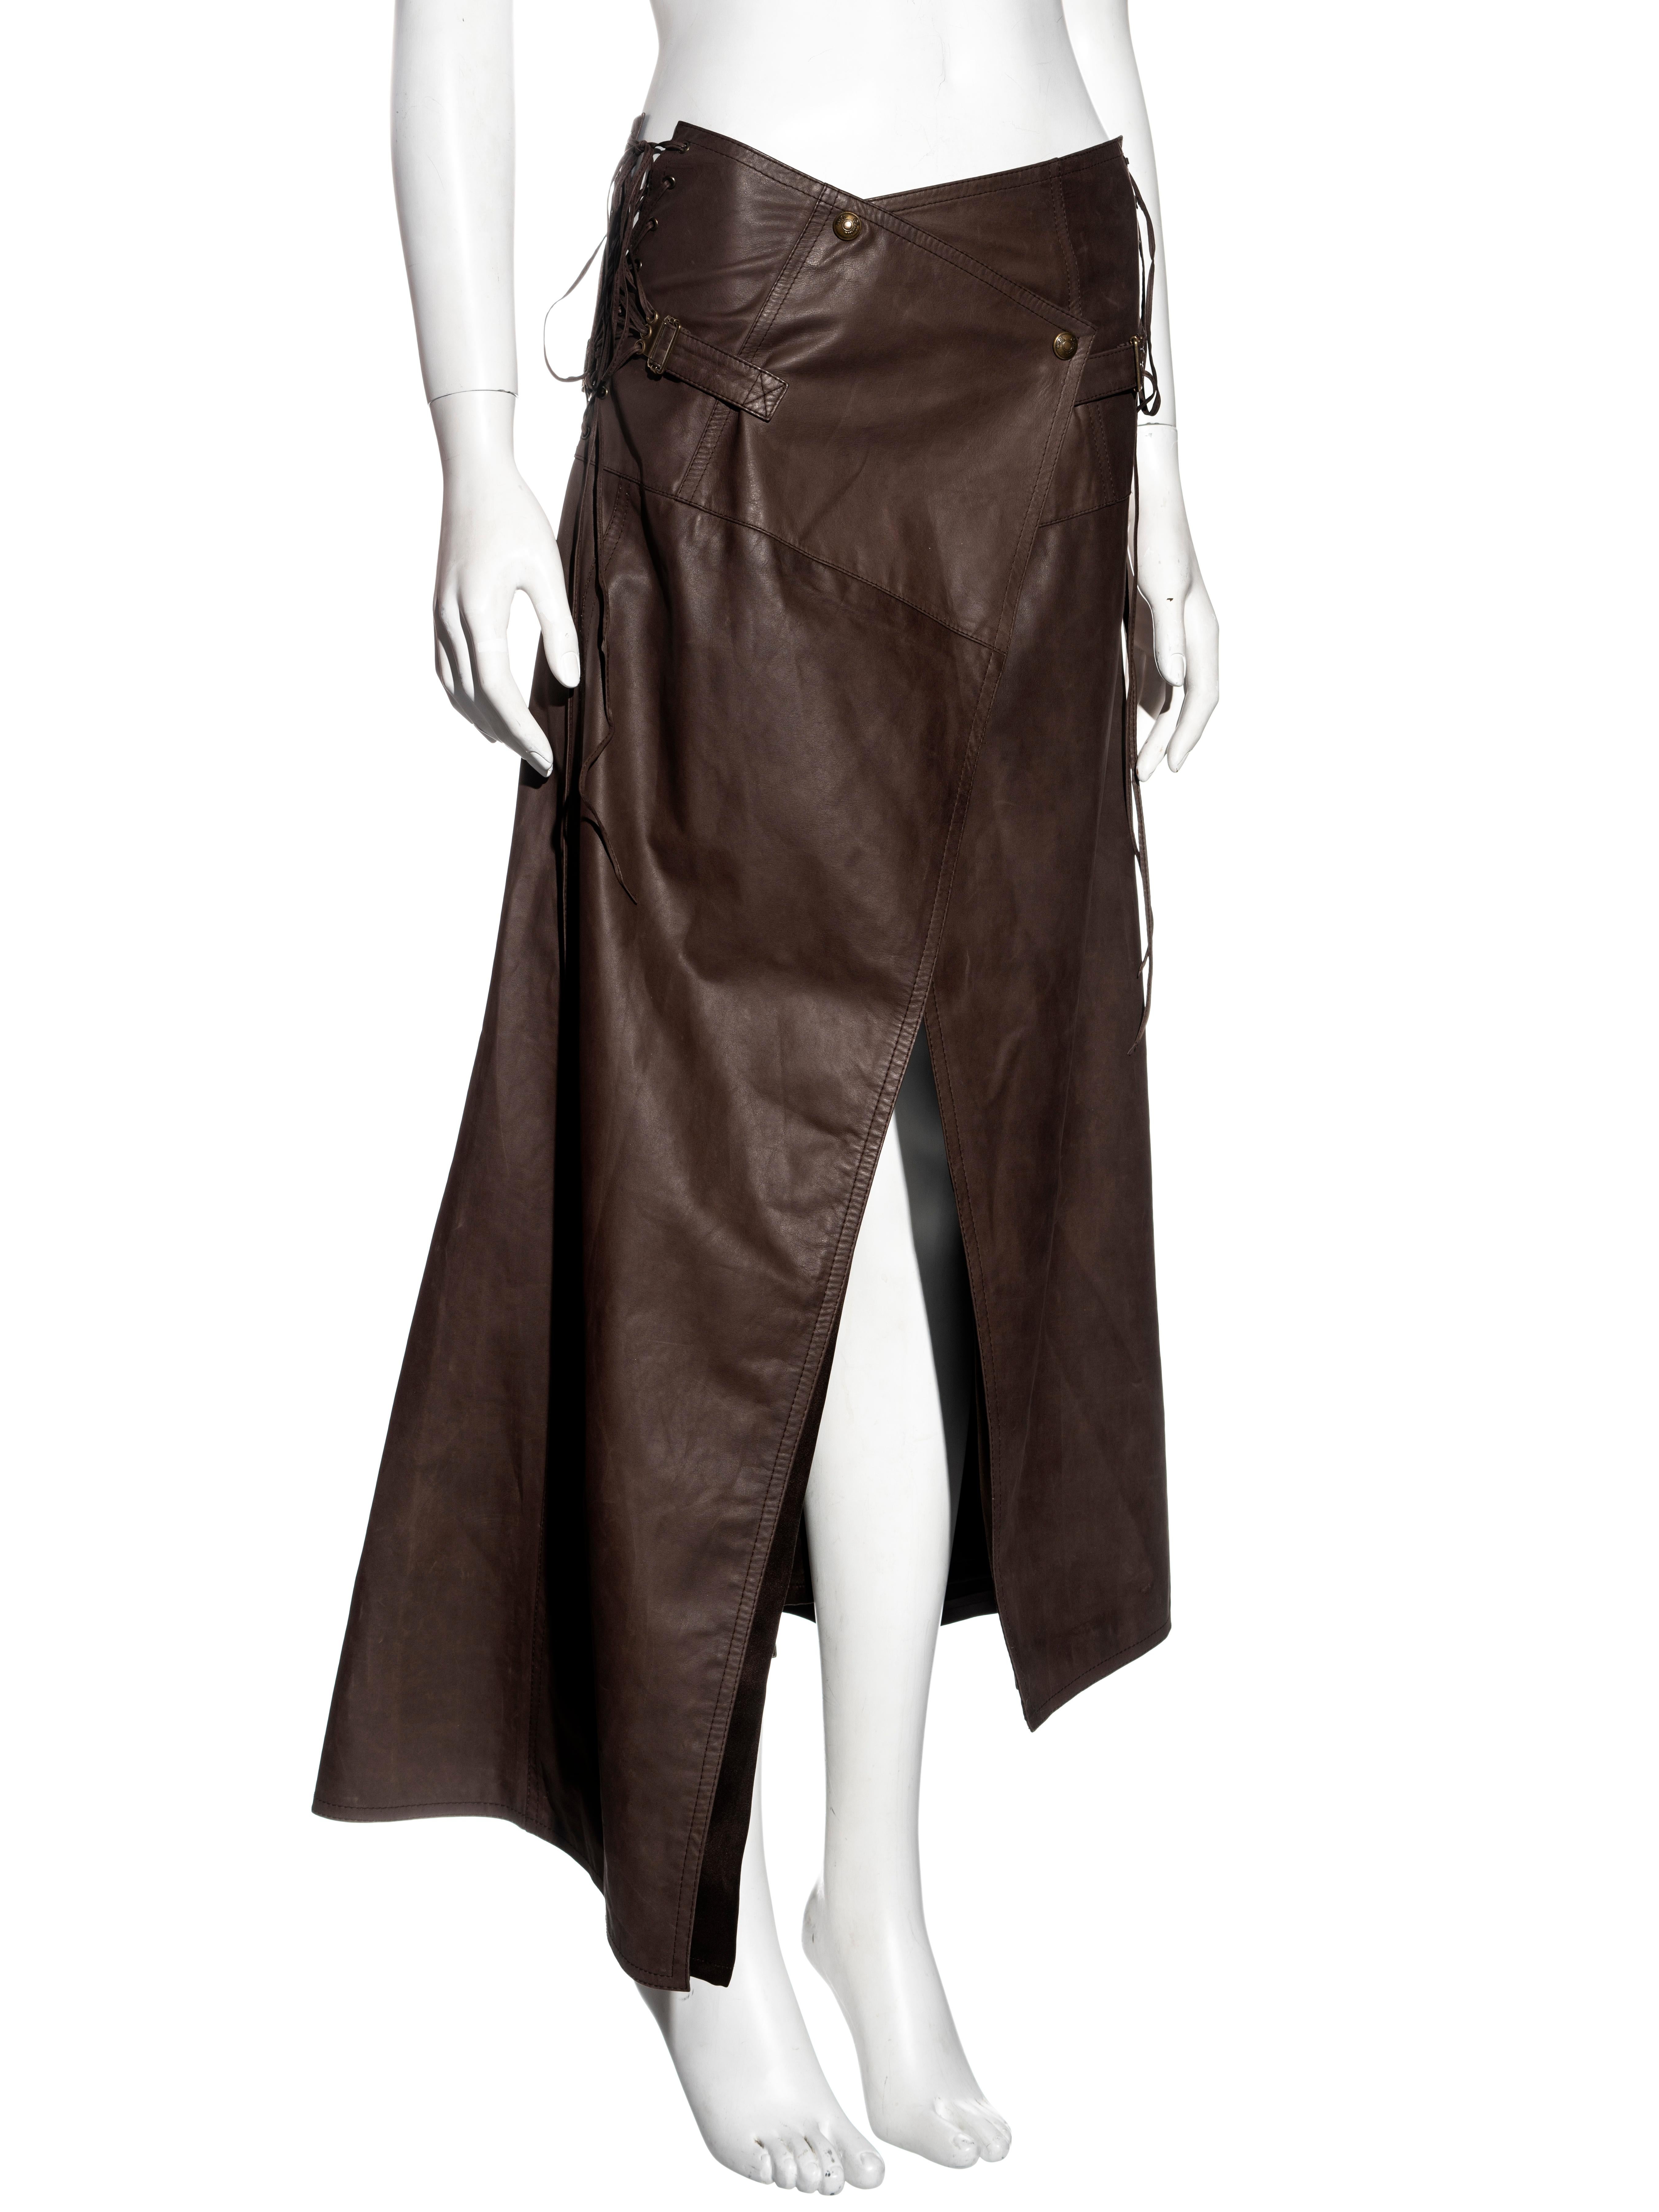 Christian Dior by John Galliano brown leather wrap skirt, ss 2001 2